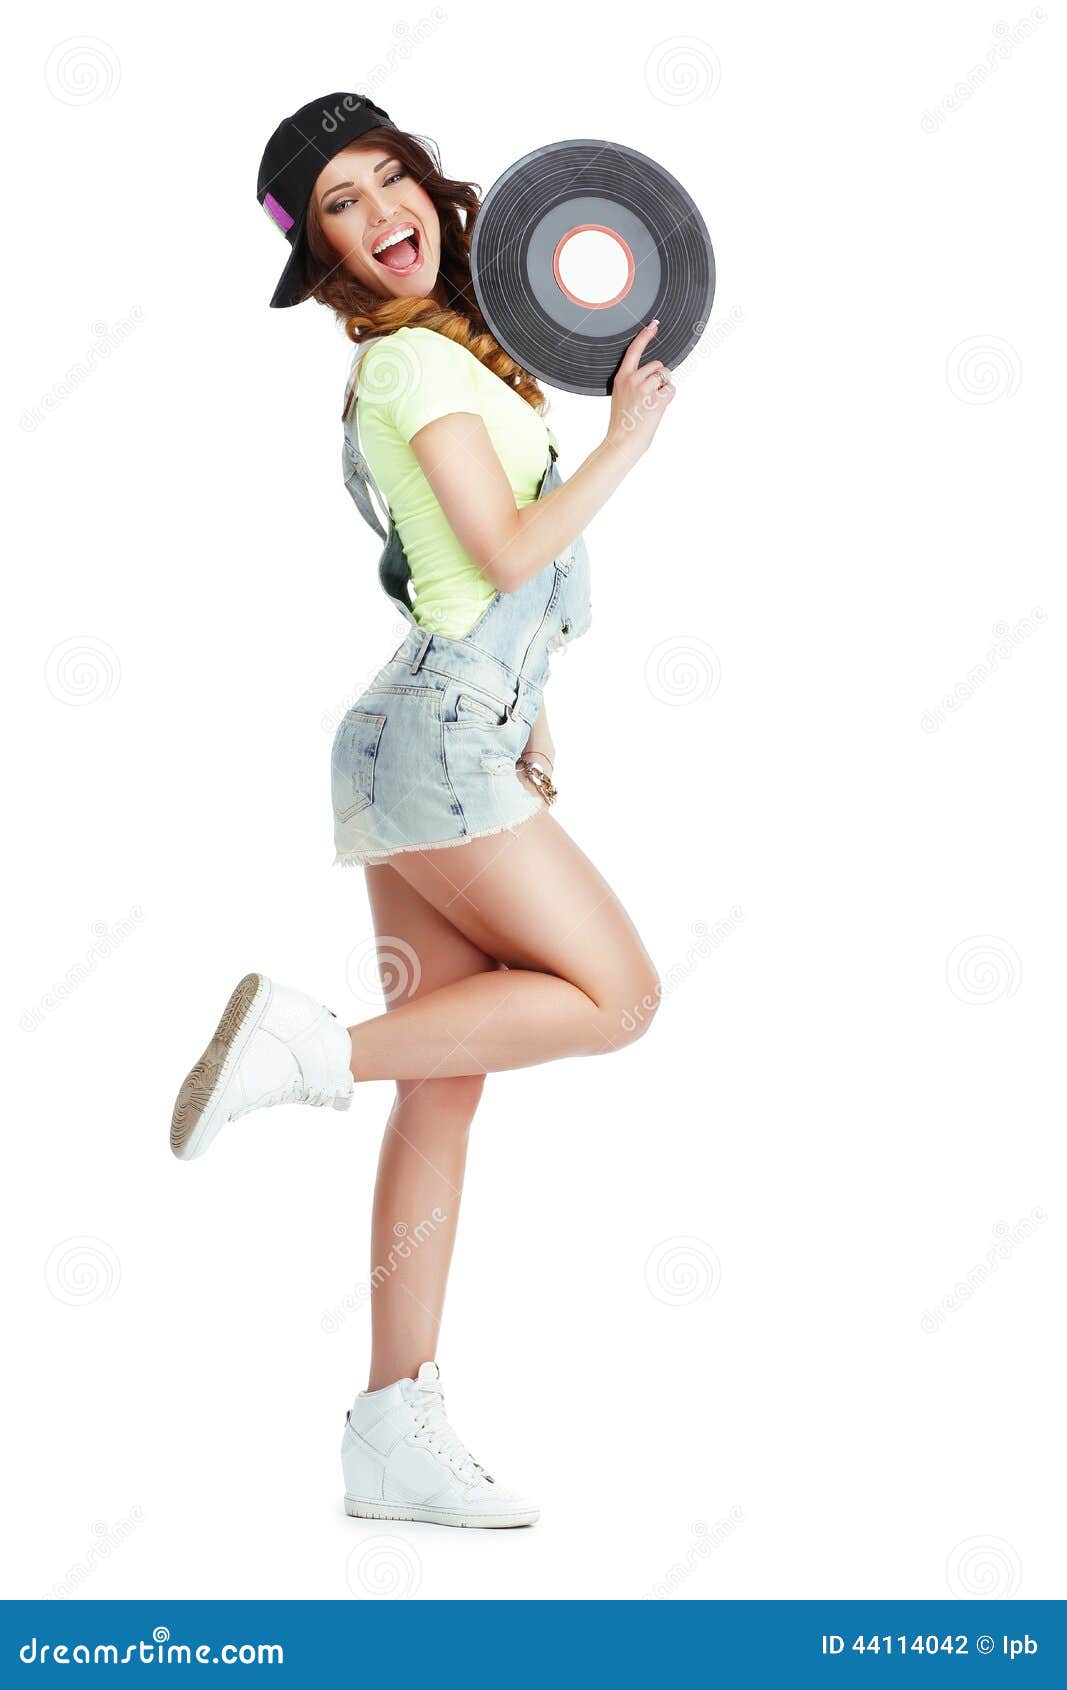 profile of elated jubilant woman with vinyl record  on white background